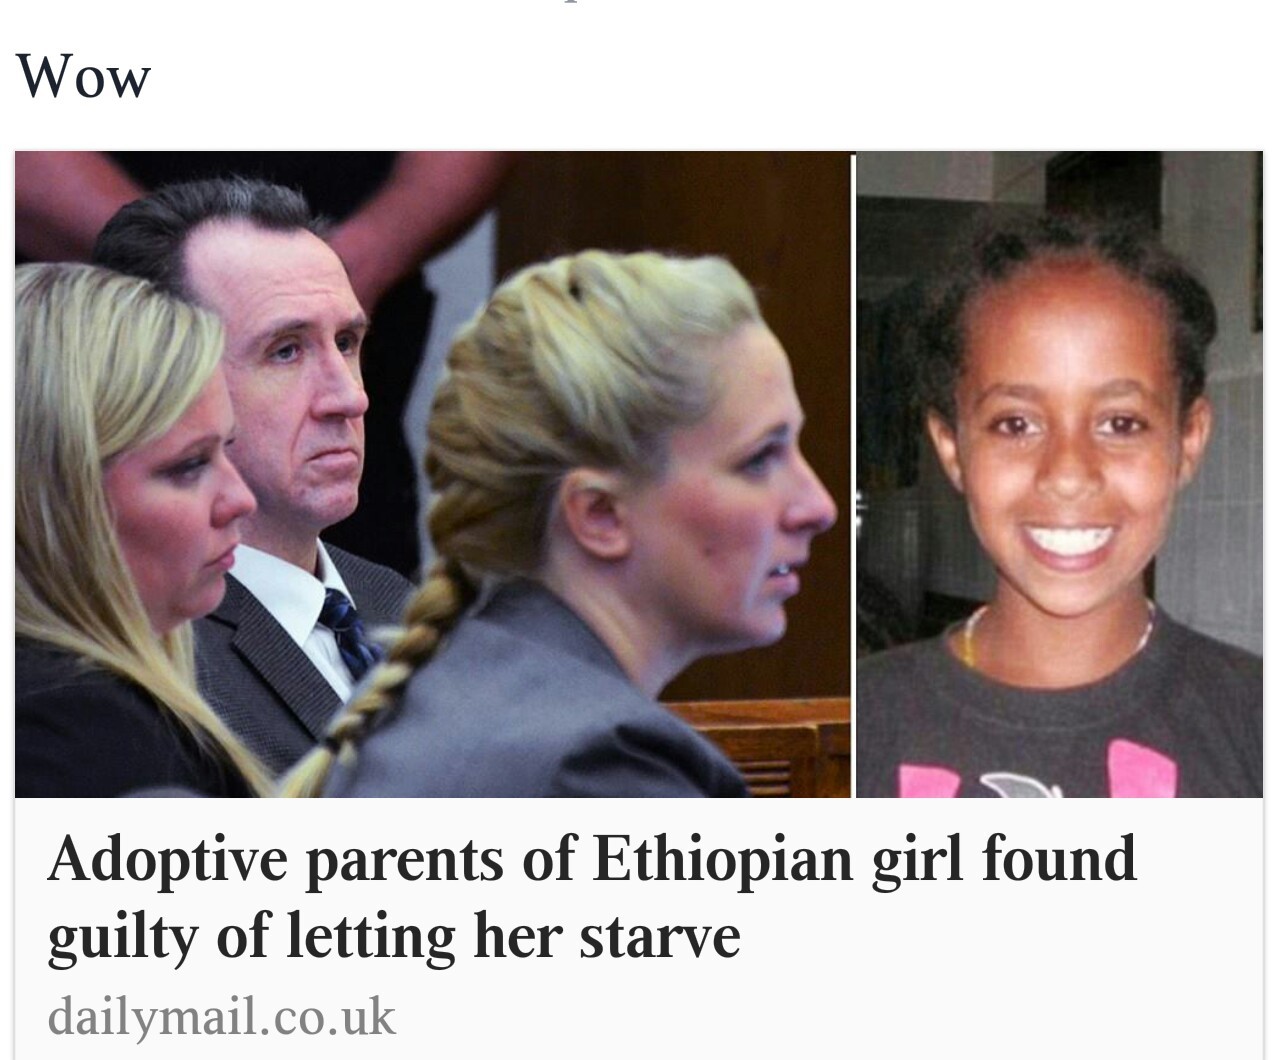 teamrocketing:
“ strangeasanjles:
“ tashabilities:
“ White people should be banned from adopting transracially.
”
Kenya has approved an indefinite ban on adoption by foreigners. This needs to spread like wildfire…White people using Black and Brown...